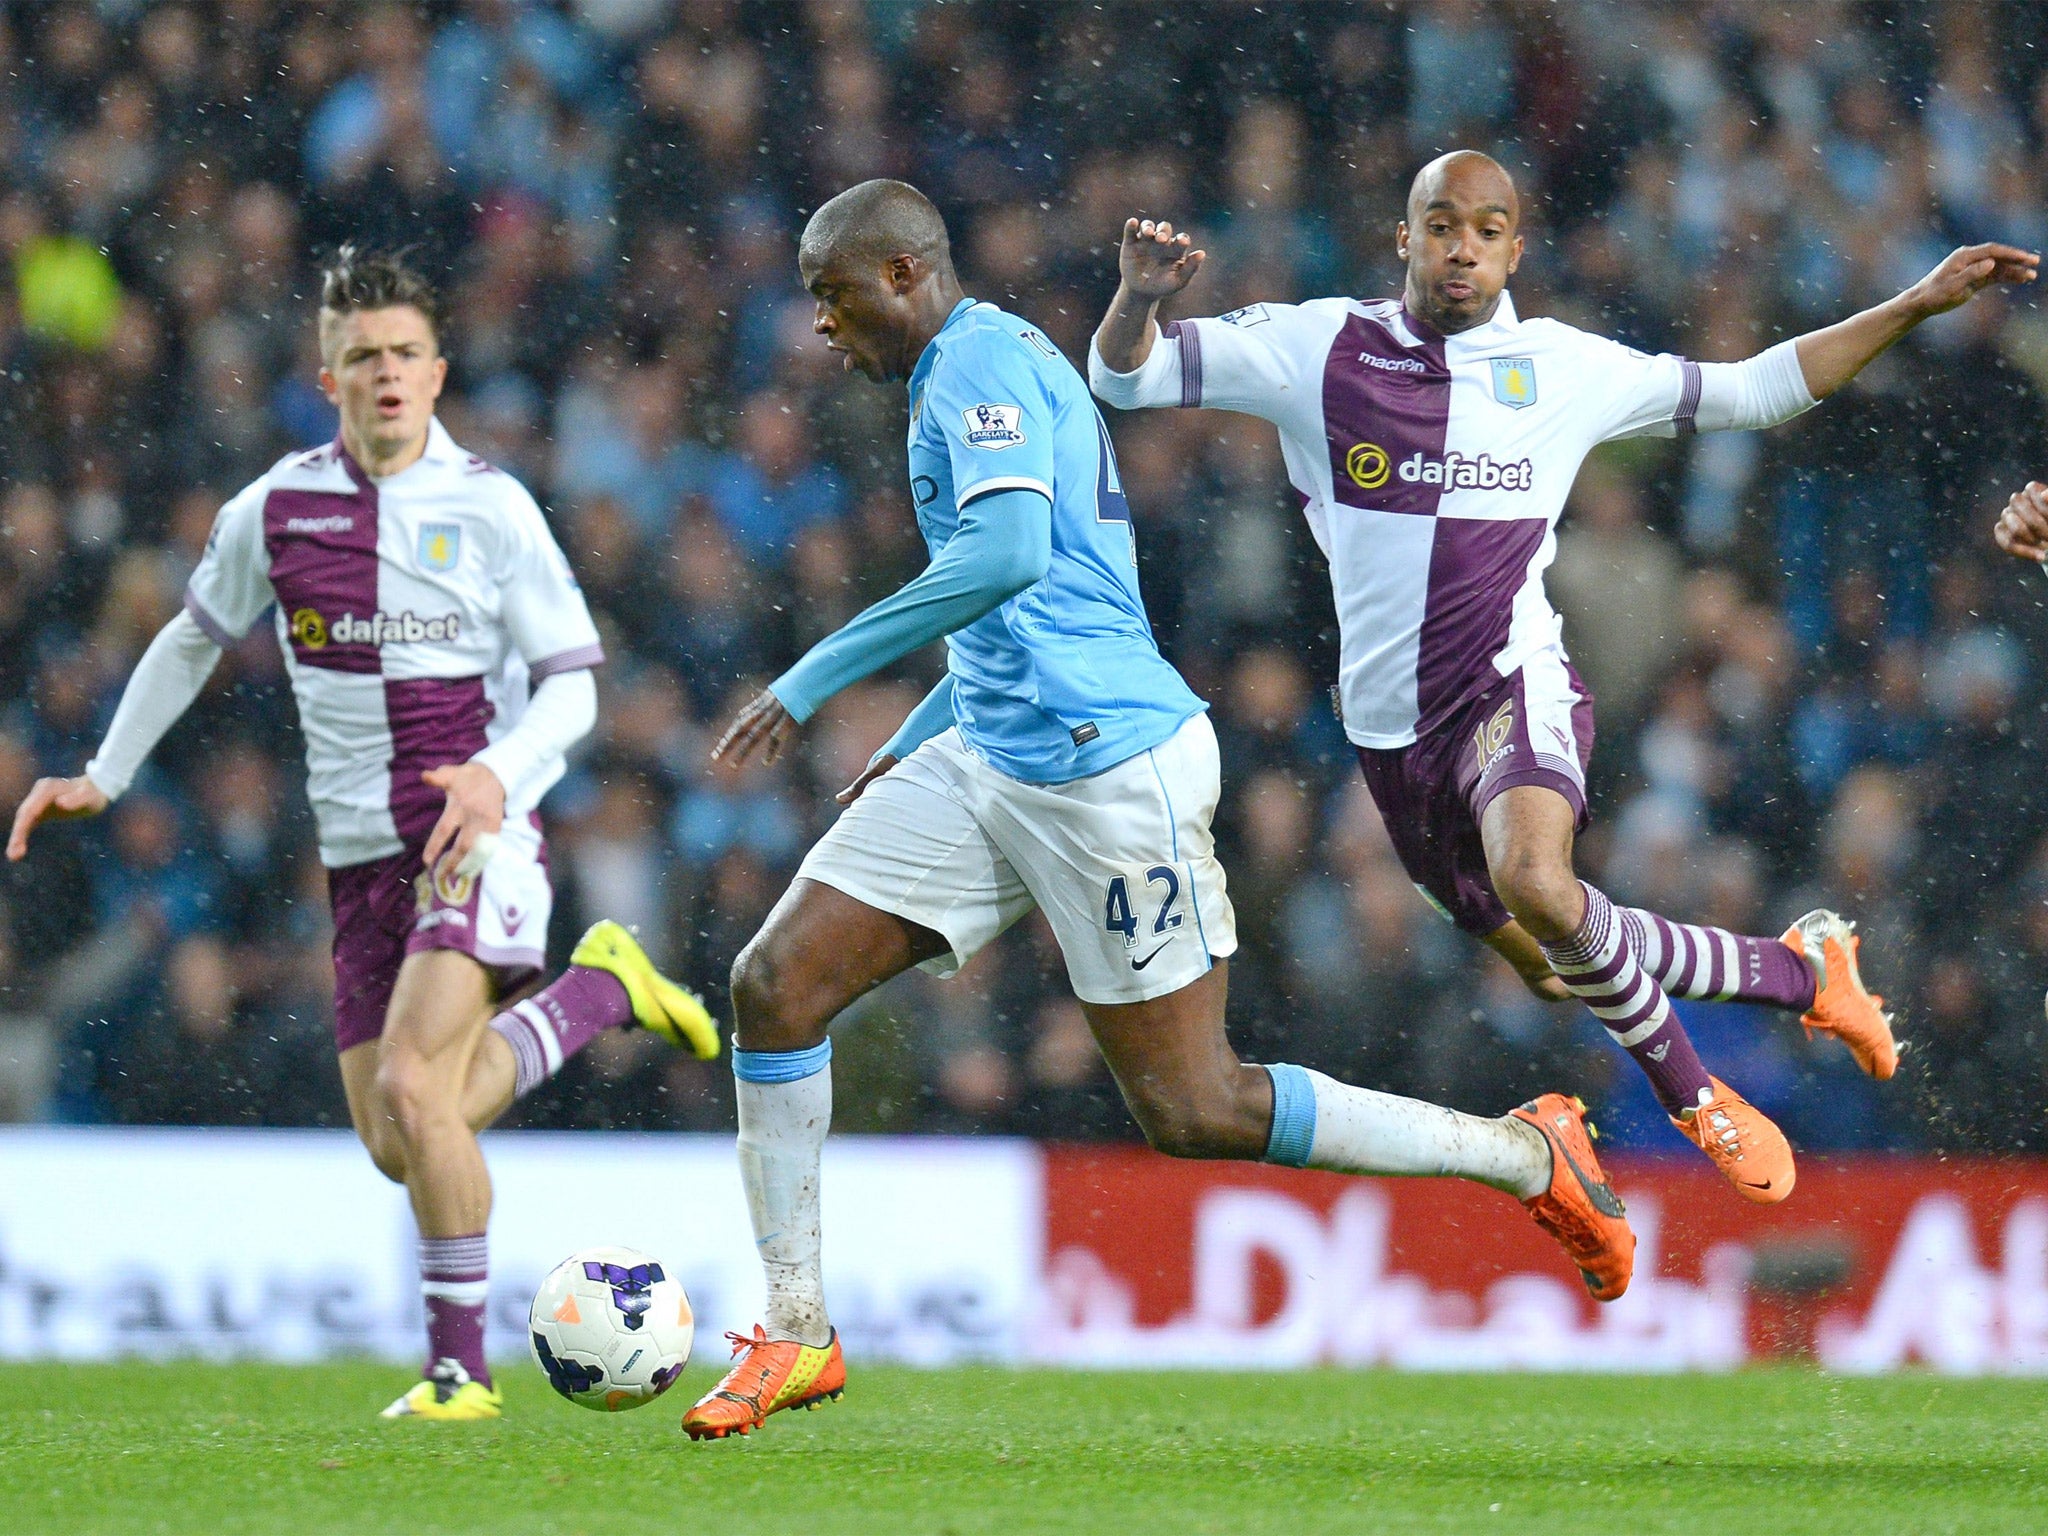 Yaya Touré leaves behind two Villa players on his way to scoring a stunning fourth goal for City (Getty)